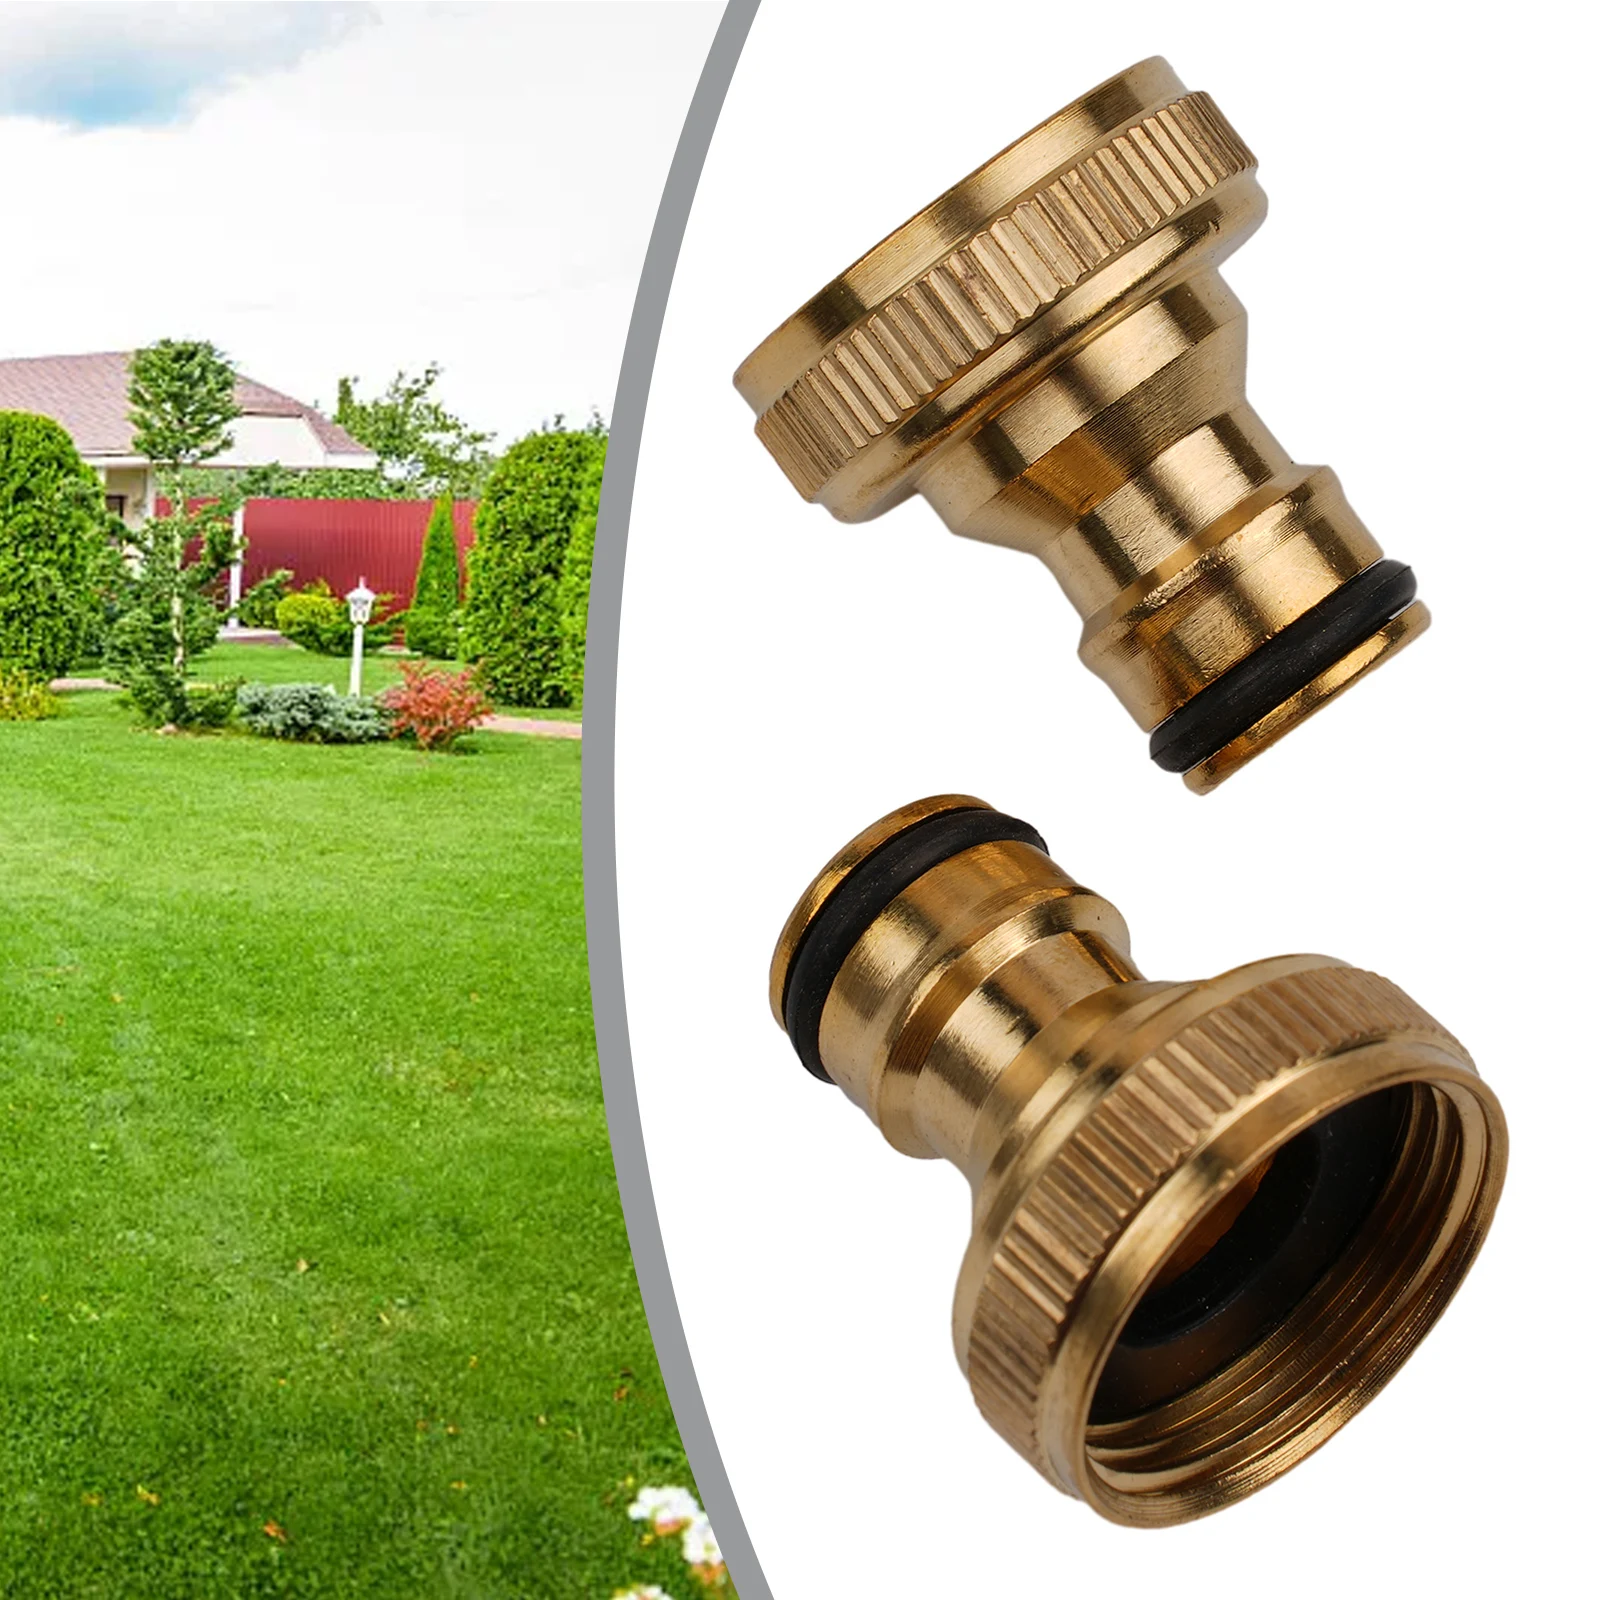 

Durable Practical Quality Thread Connector Quick Adaptor Water Pipe 1.57*1.18in 2PCS 3/4" To 1/2" Brass Faucet